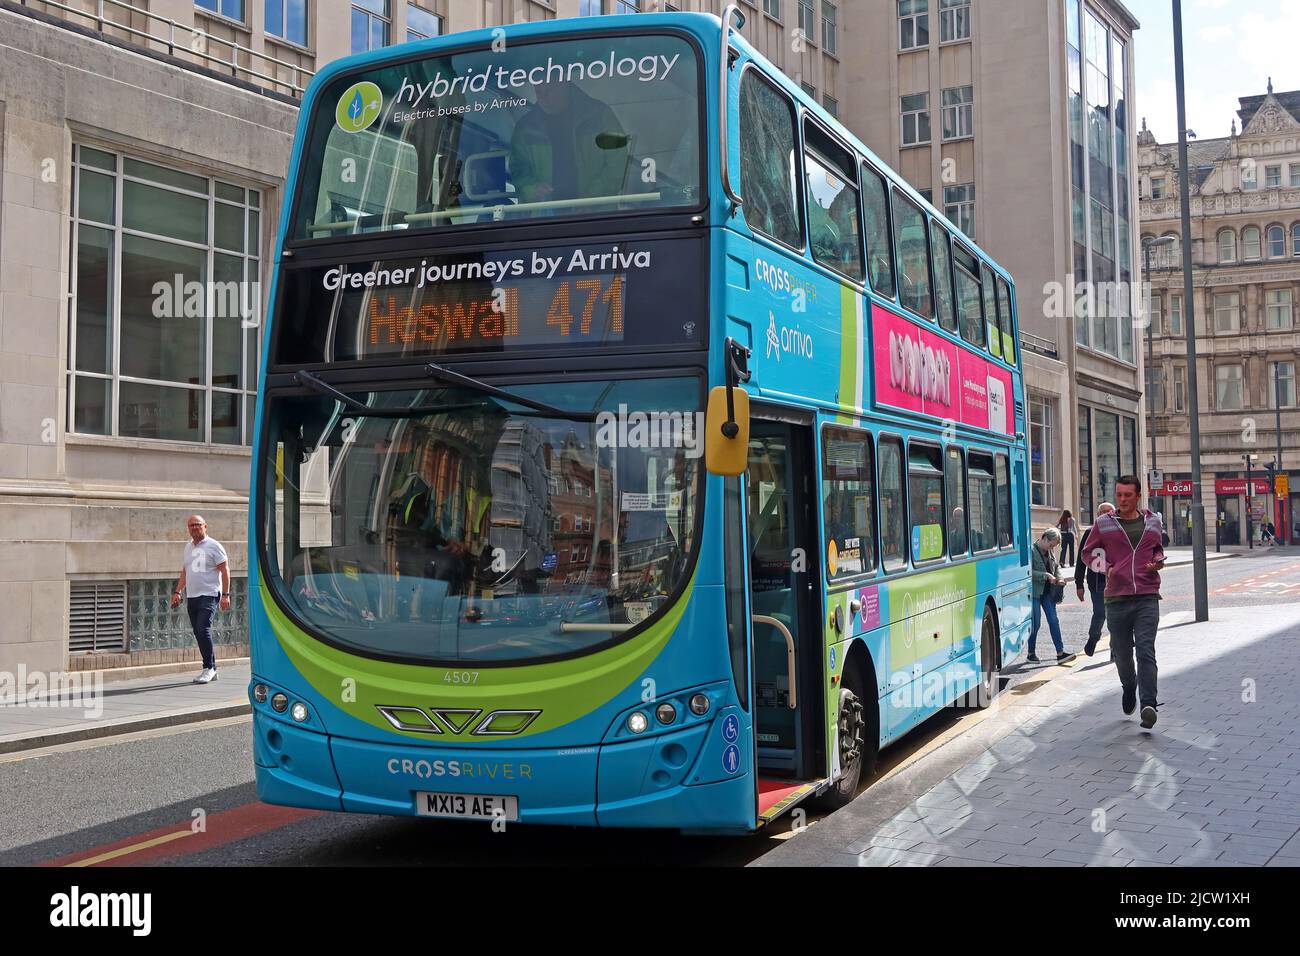 Mersey cross-river bus service 471 to Heswall, Arriva hybrid technology, off Castle Street, in Liverpool, Merseyside, England, L2 0NR Stock Photo